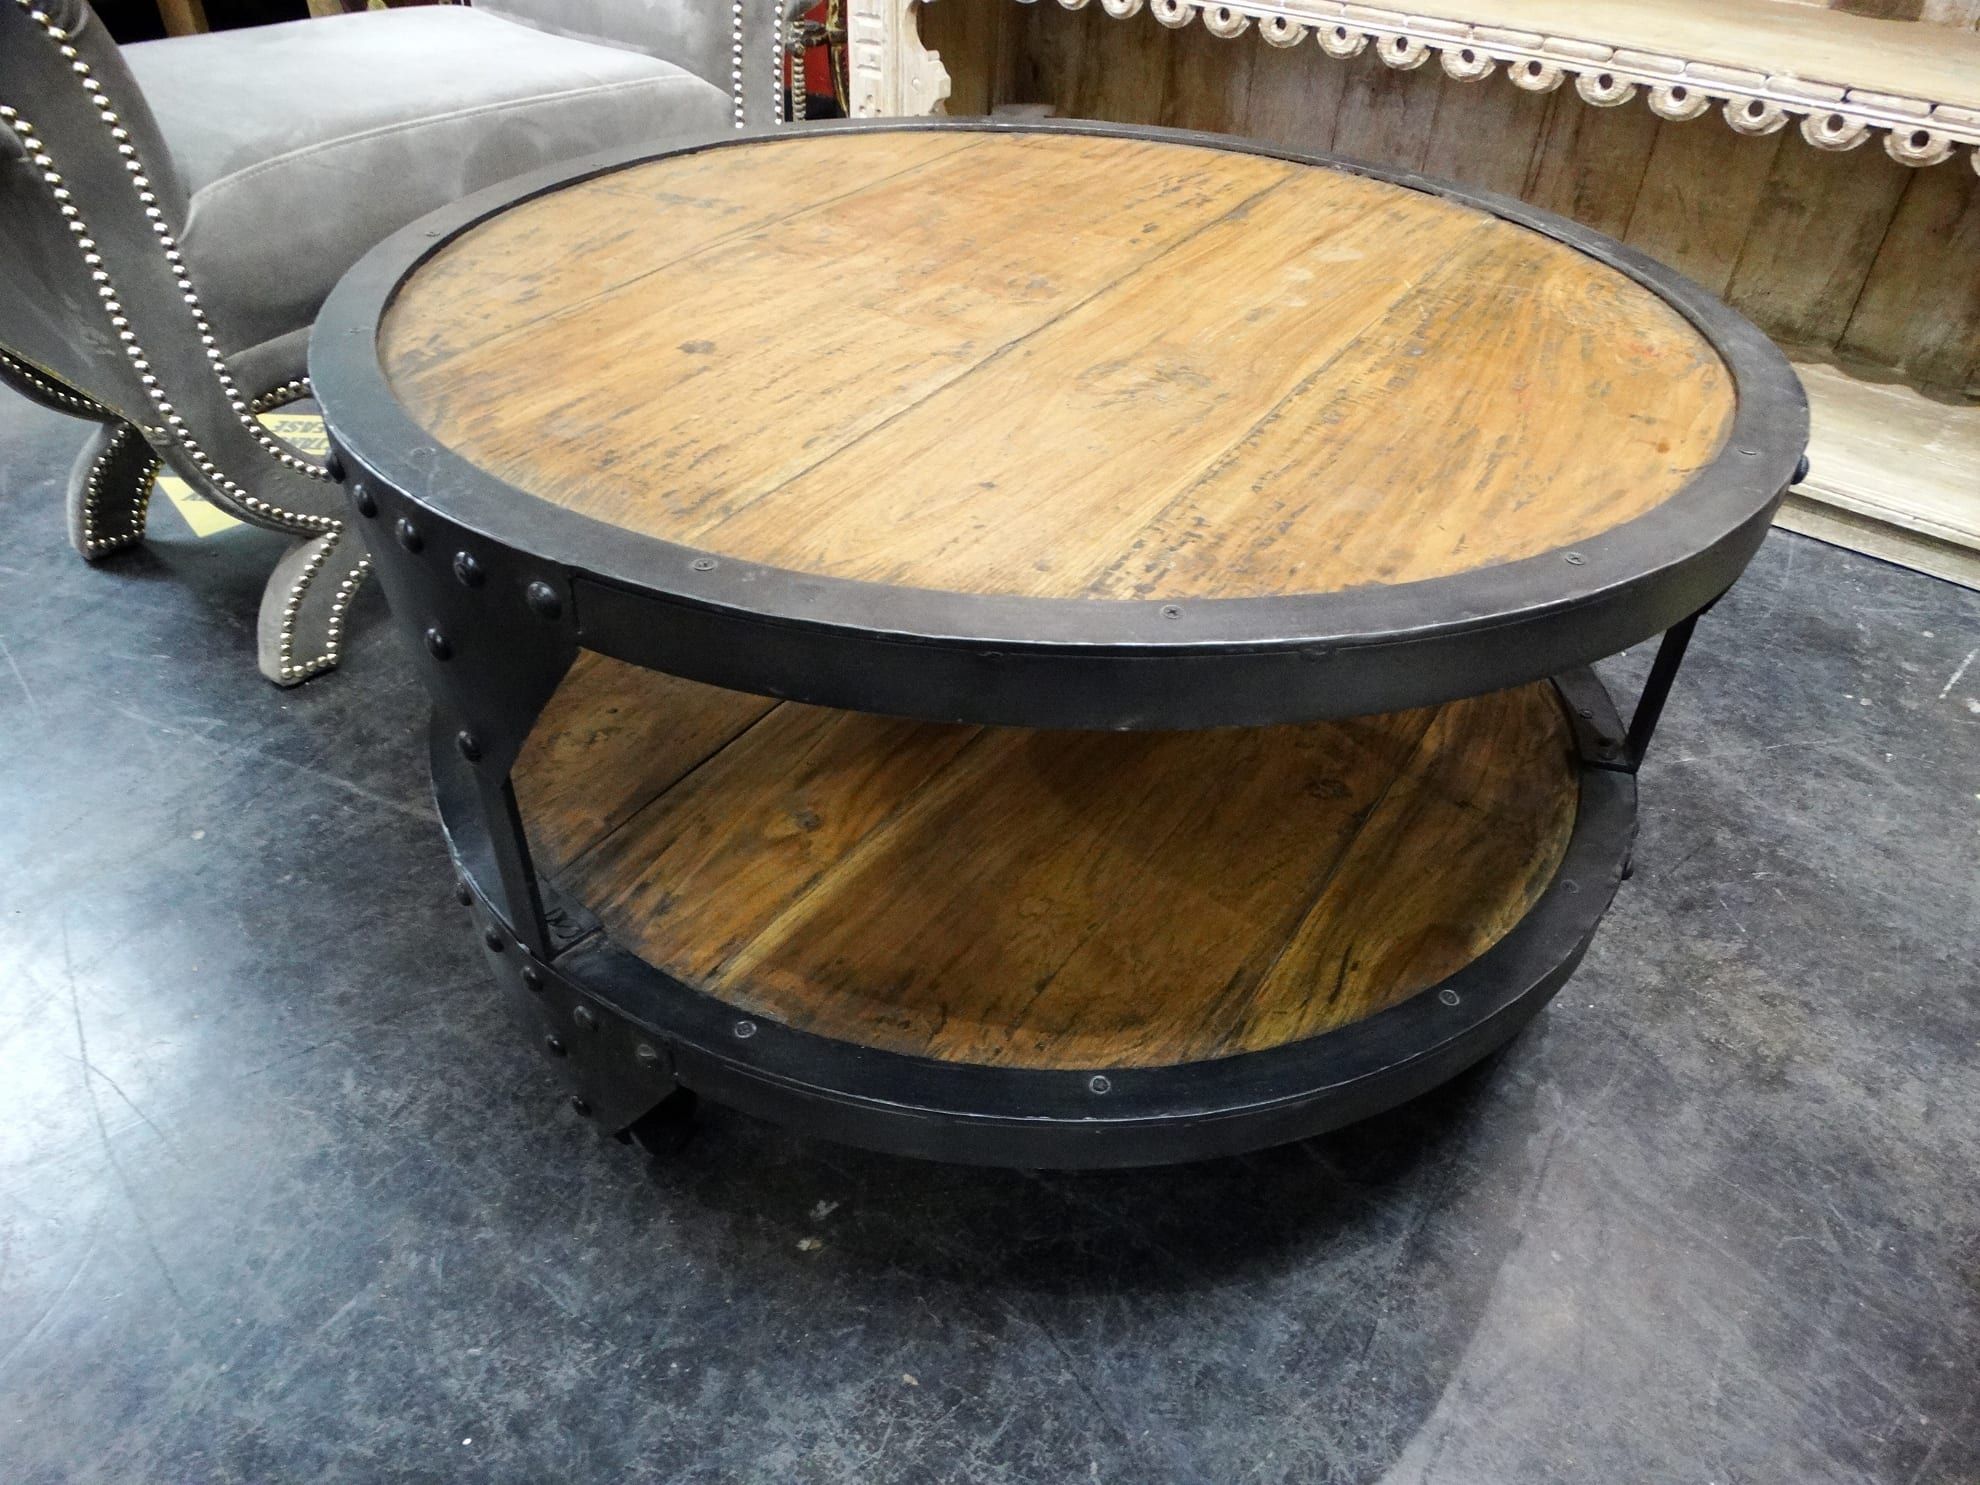 Rustic Industrial Round Coffee Table Throughout Round Industrial Coffee Tables (View 5 of 15)